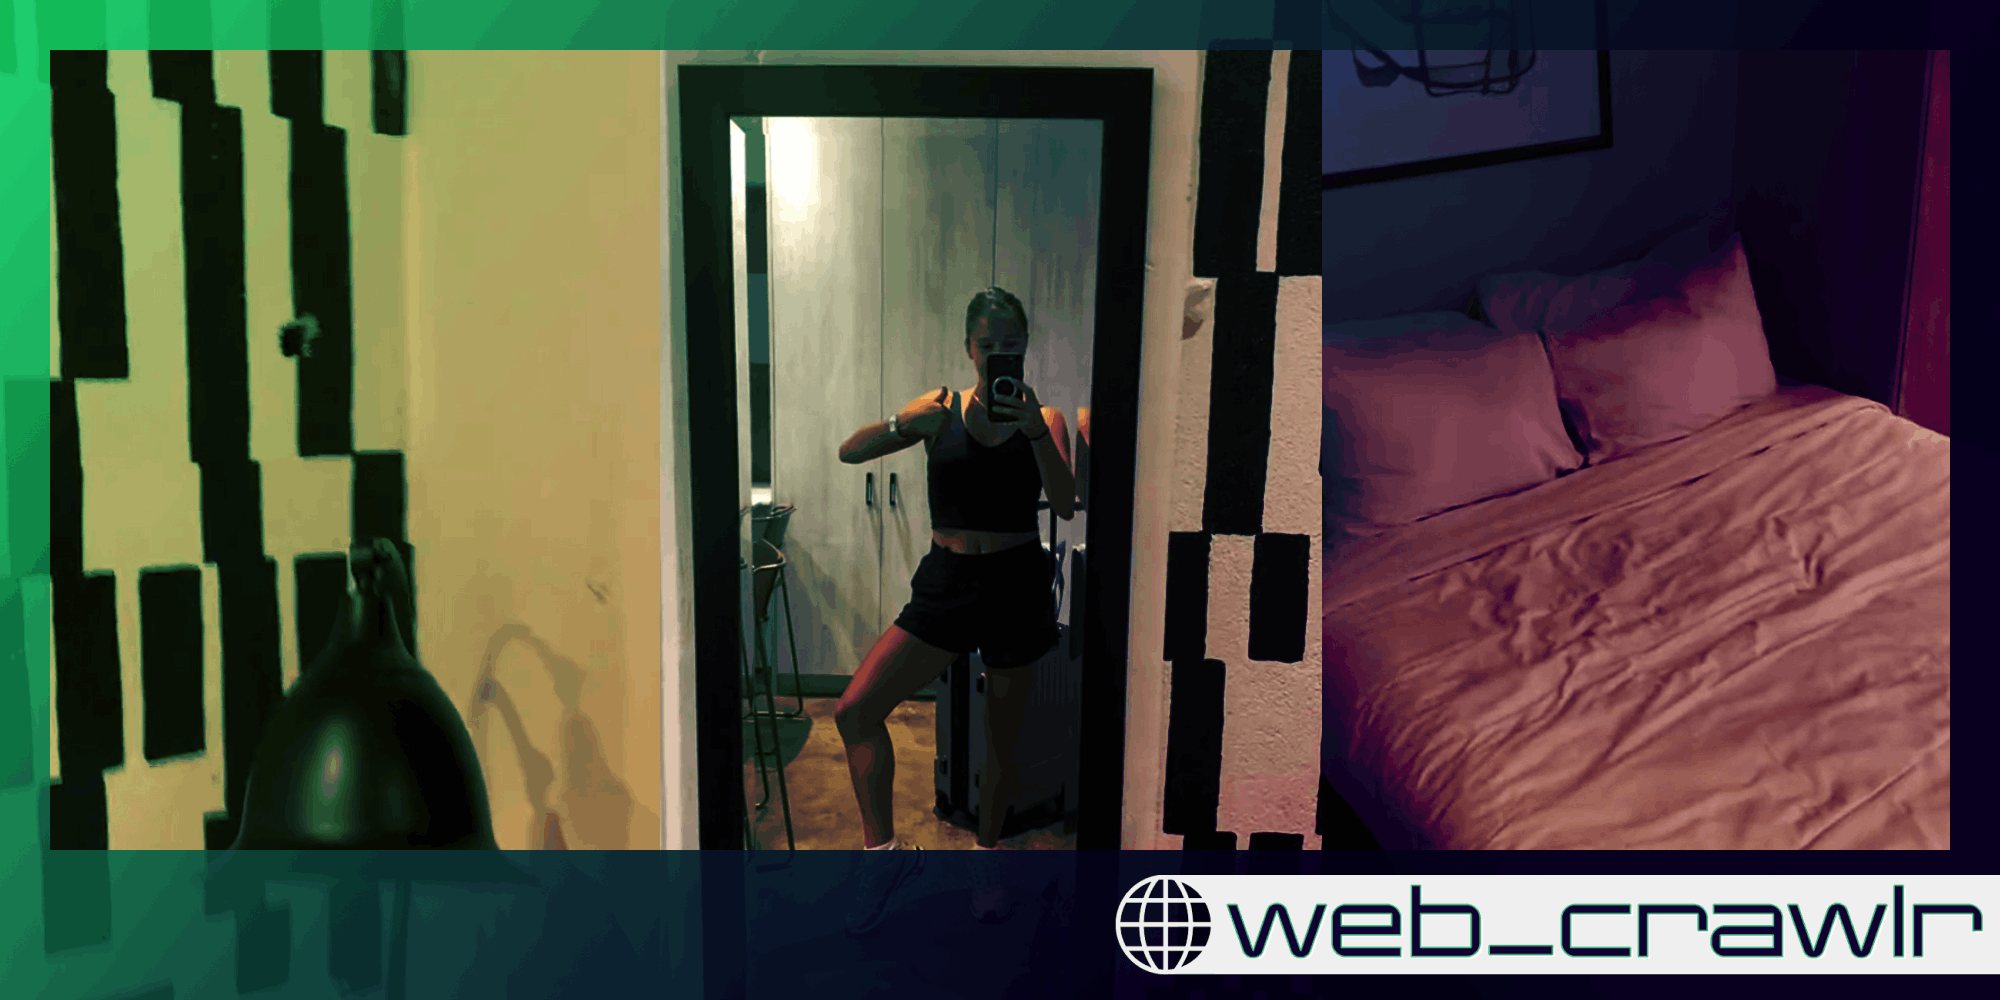 A hole in a wall (L), a woman posing in the mirror (C), and a bed (R). The Daily Dot newsletter web_crawlr logo is in the bottom right corner.